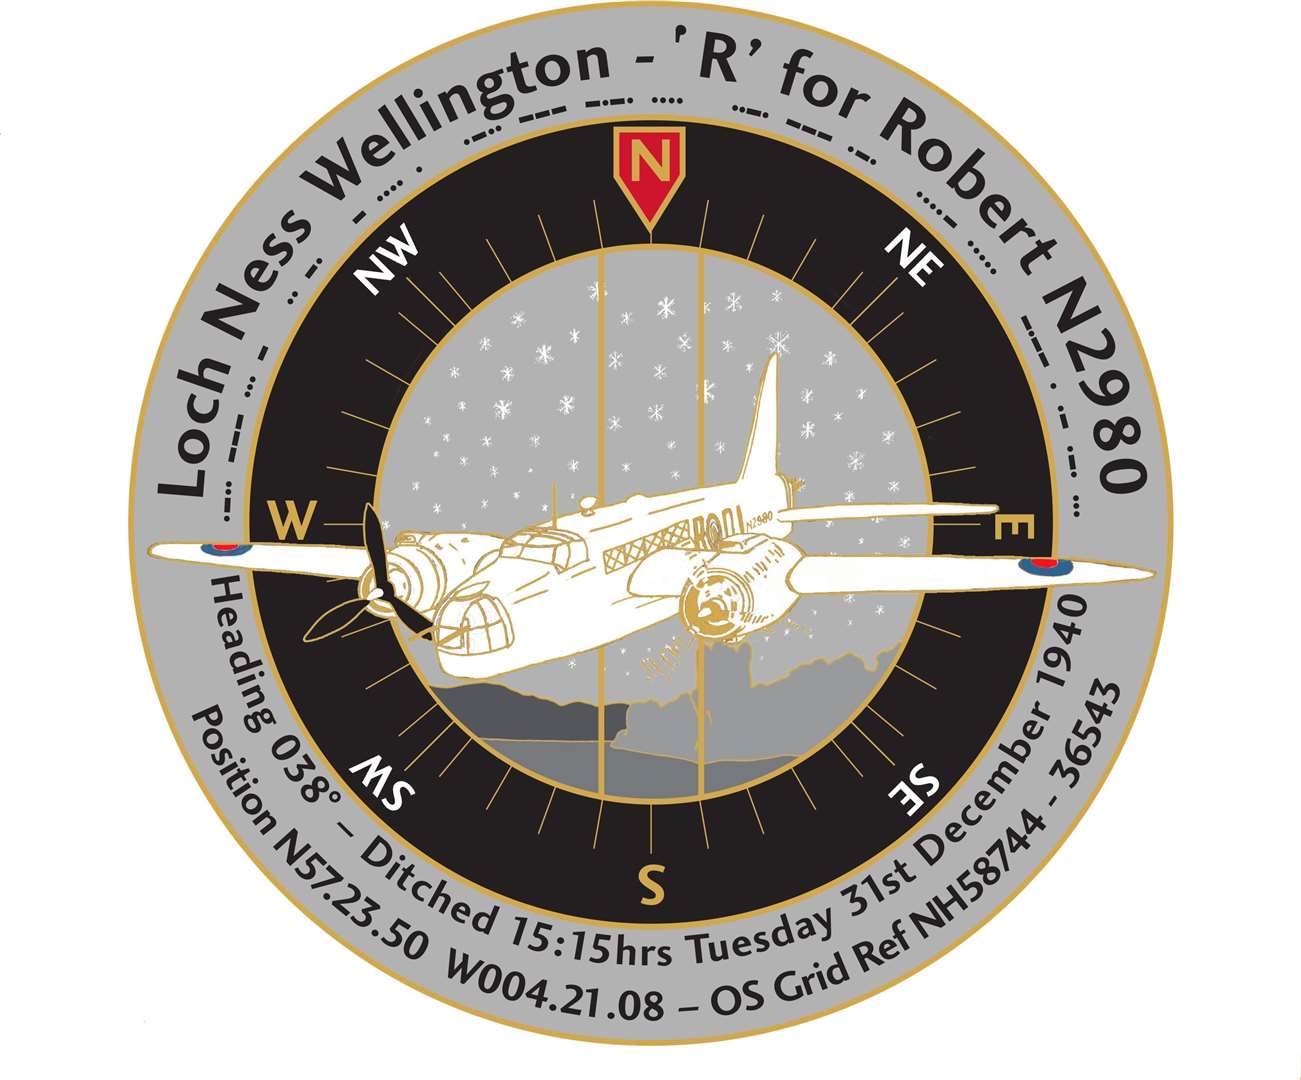 Commemorations willl mark the 80th anniversary of the ditching of the Wellington.